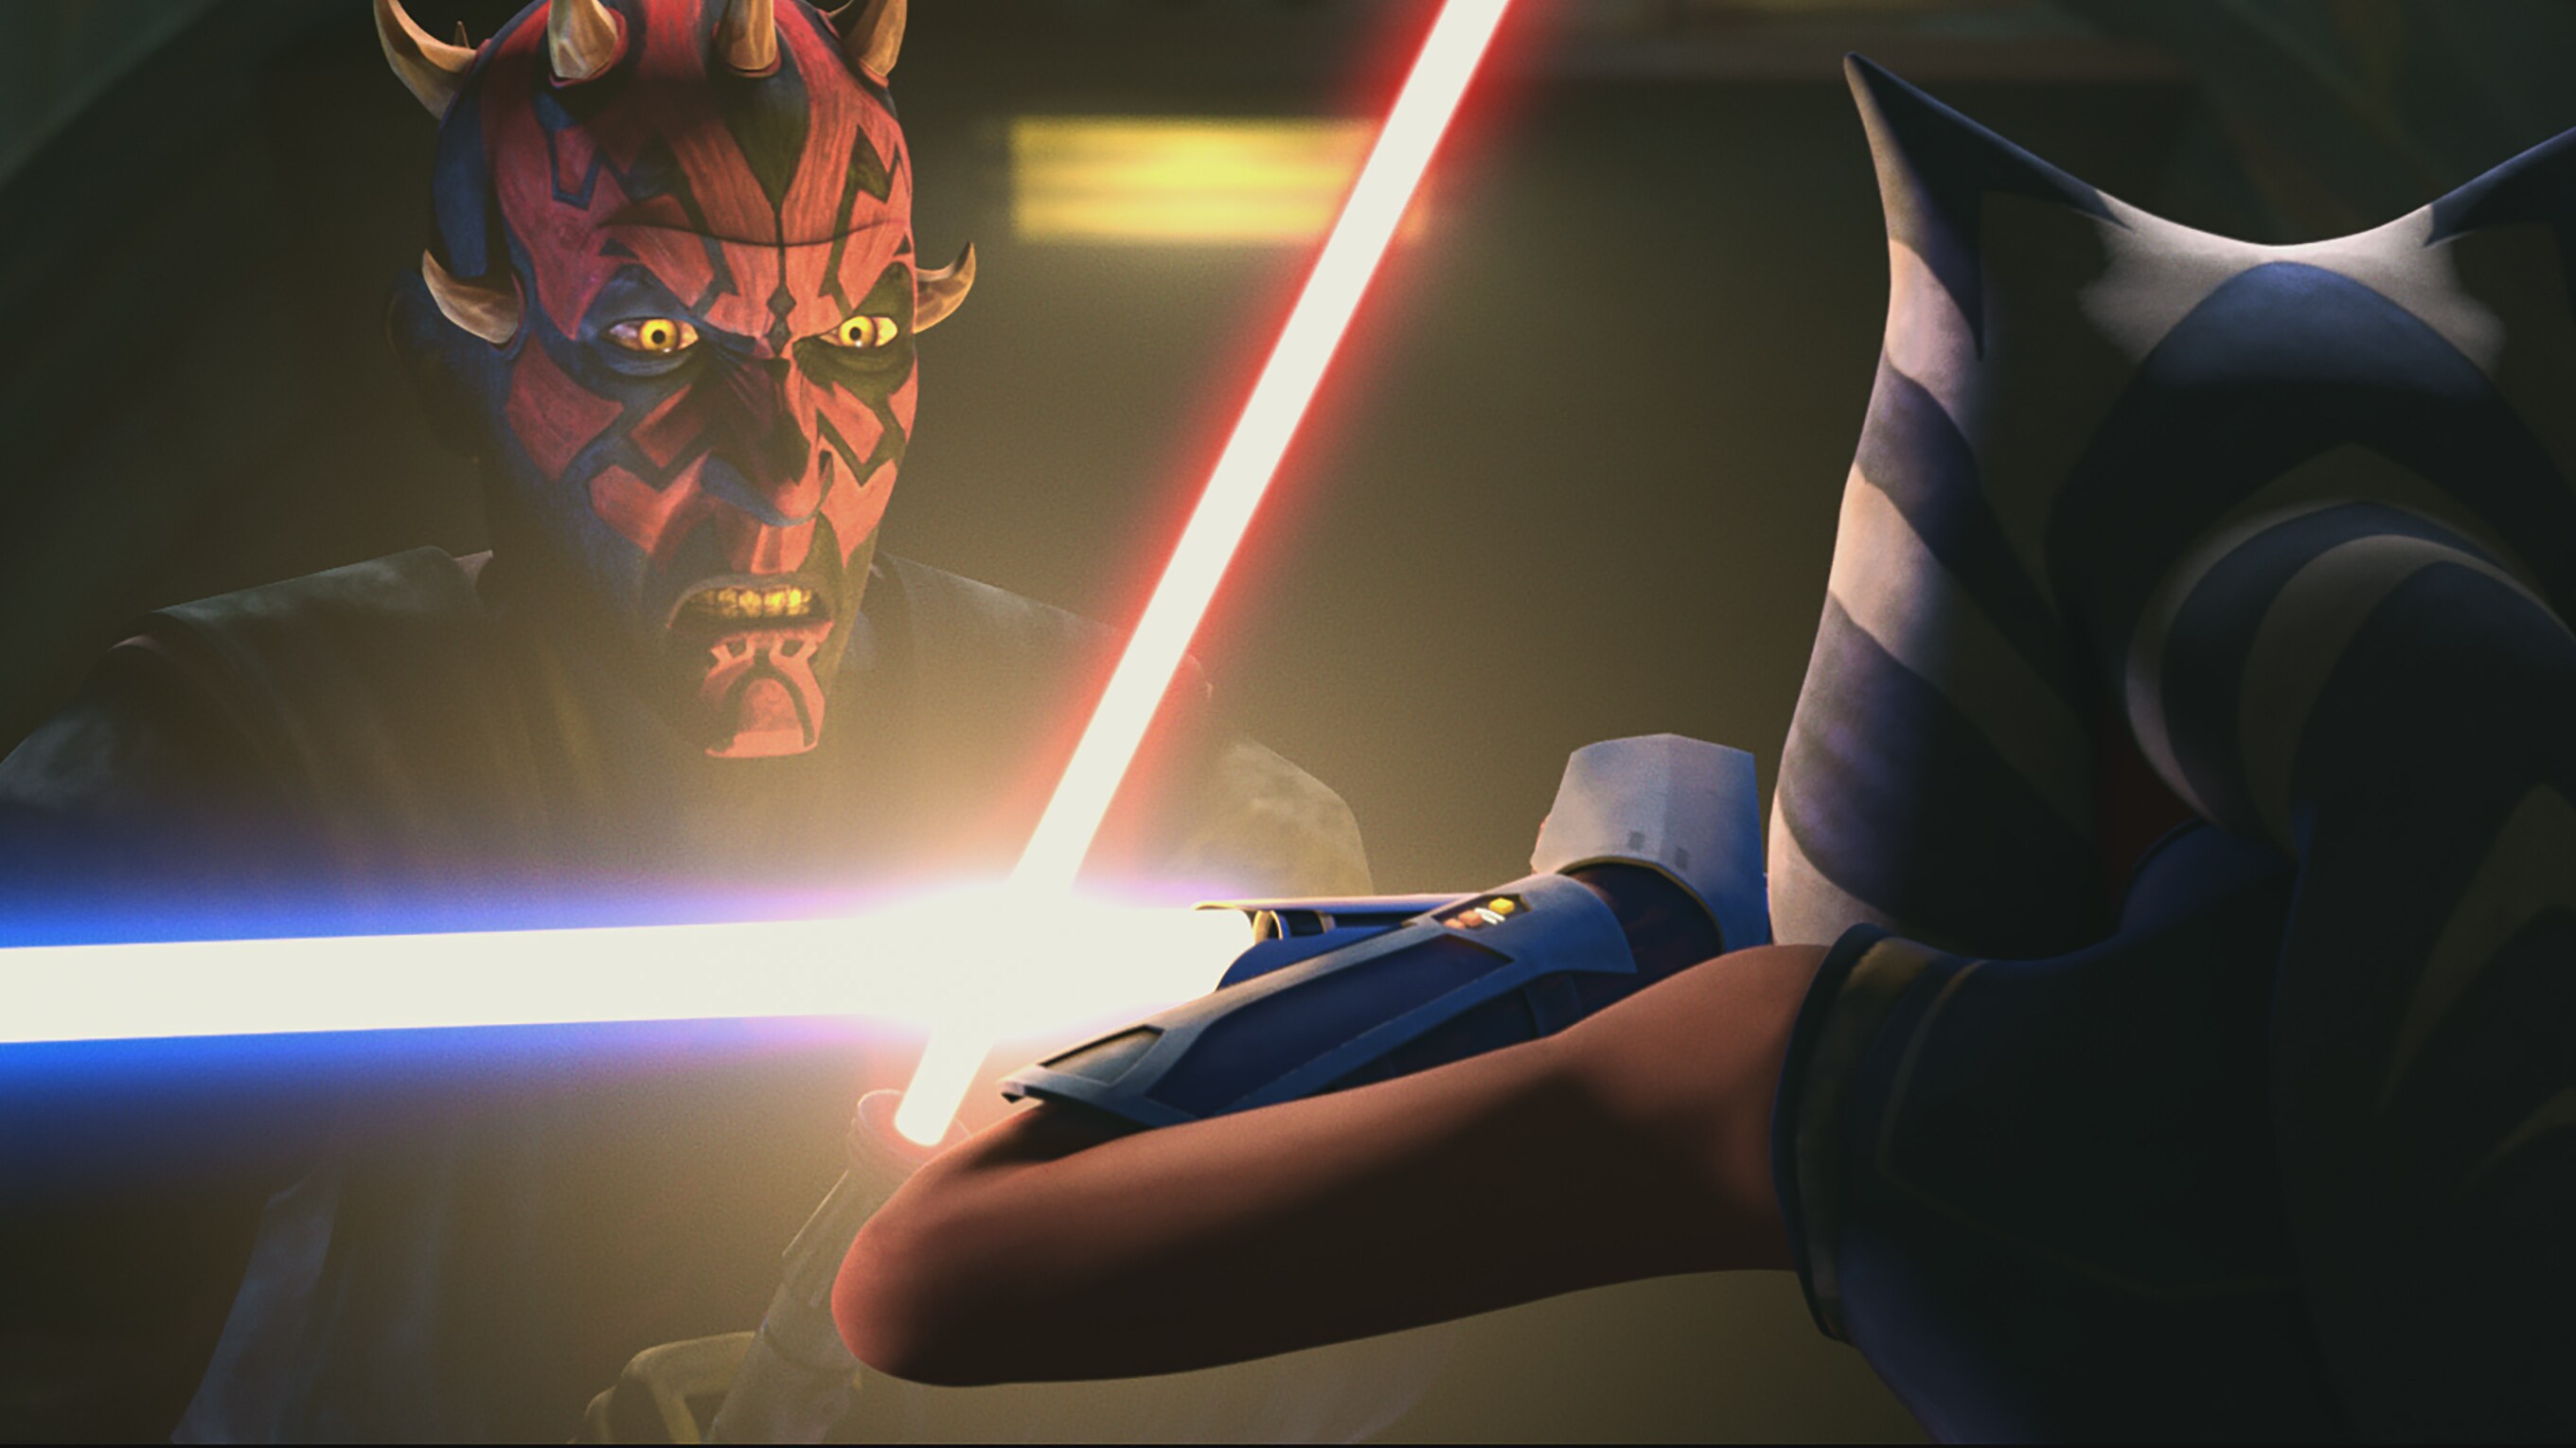 Maul and Ahsoka in STAR WARS: THE CLONE WARS, exclusively on Disney+.